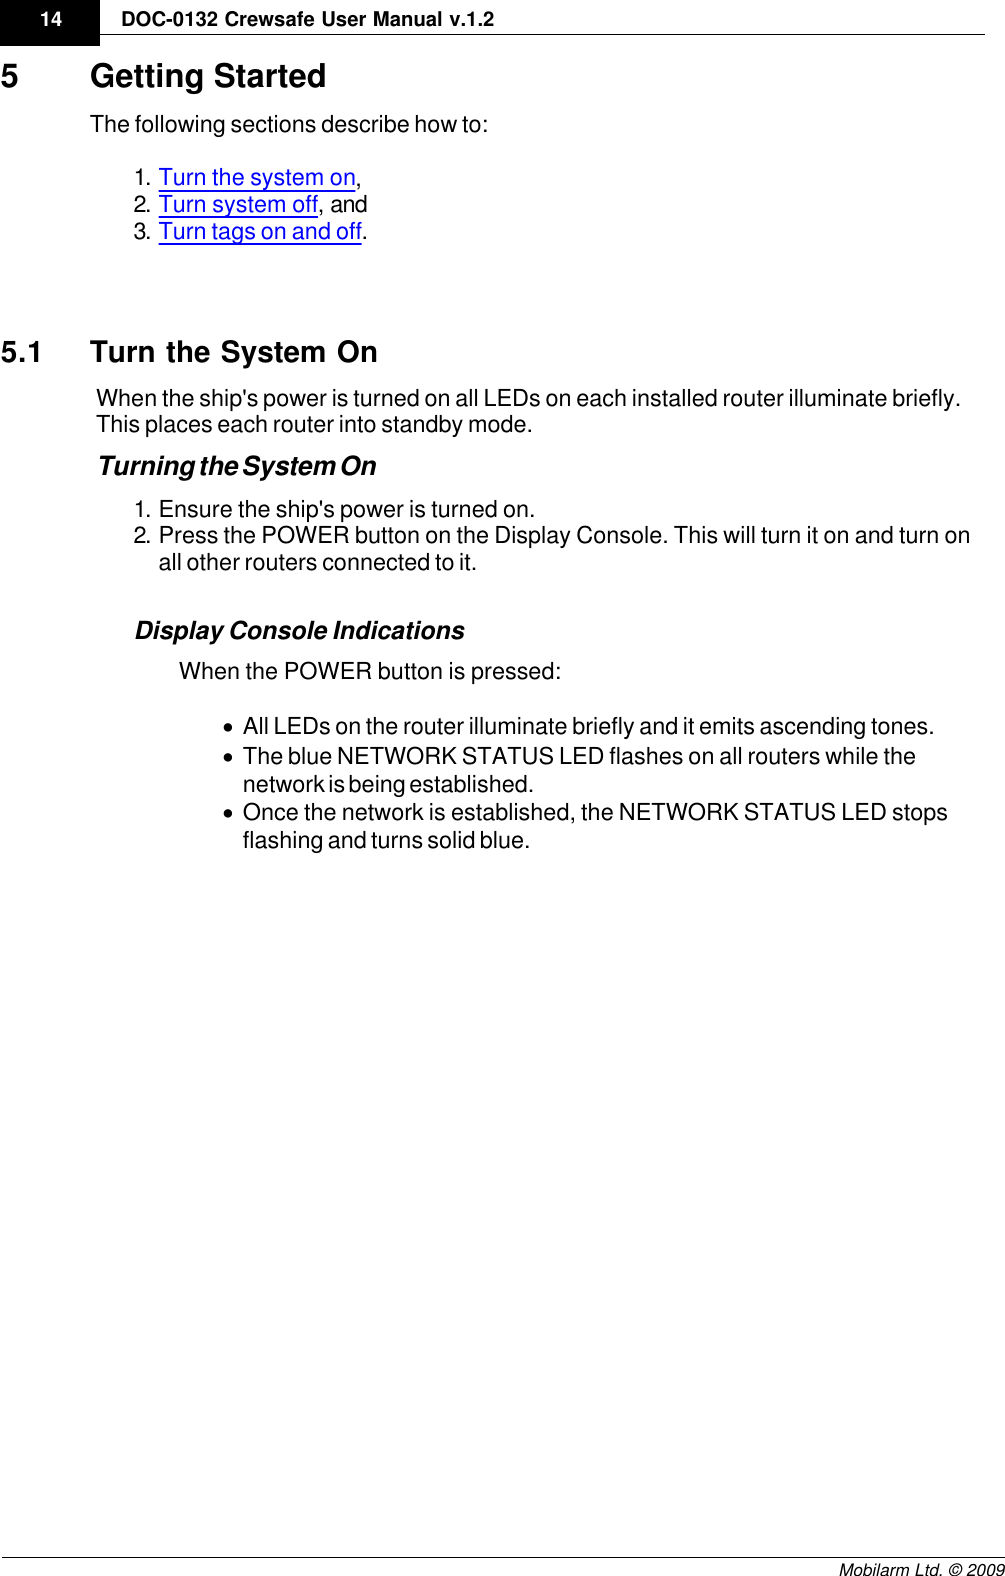 Draft14 DOC-0132 Crewsafe User Manual v.1.2Mobilarm Ltd. © 20095 Getting StartedThe following sections describe how to:1. Turn the system on,2. Turn system off, and3. Turn tags on and off.5.1 Turn the System OnWhen the ship&apos;s power is turned on all LEDs on each installed router illuminate briefly.This places each router into standby mode.Turning the System On1. Ensure the ship&apos;s power is turned on.2. Press the POWER button on the Display Console. This will turn it on and turn onall other routers connected to it.Display Console IndicationsWhen the POWER button is pressed:·All LEDs on the router illuminate briefly and it emits ascending tones.·The blue NETWORK STATUS LED flashes on all routers while thenetwork is being established.·Once the network is established, the NETWORK STATUS LED stopsflashing and turns solid blue.